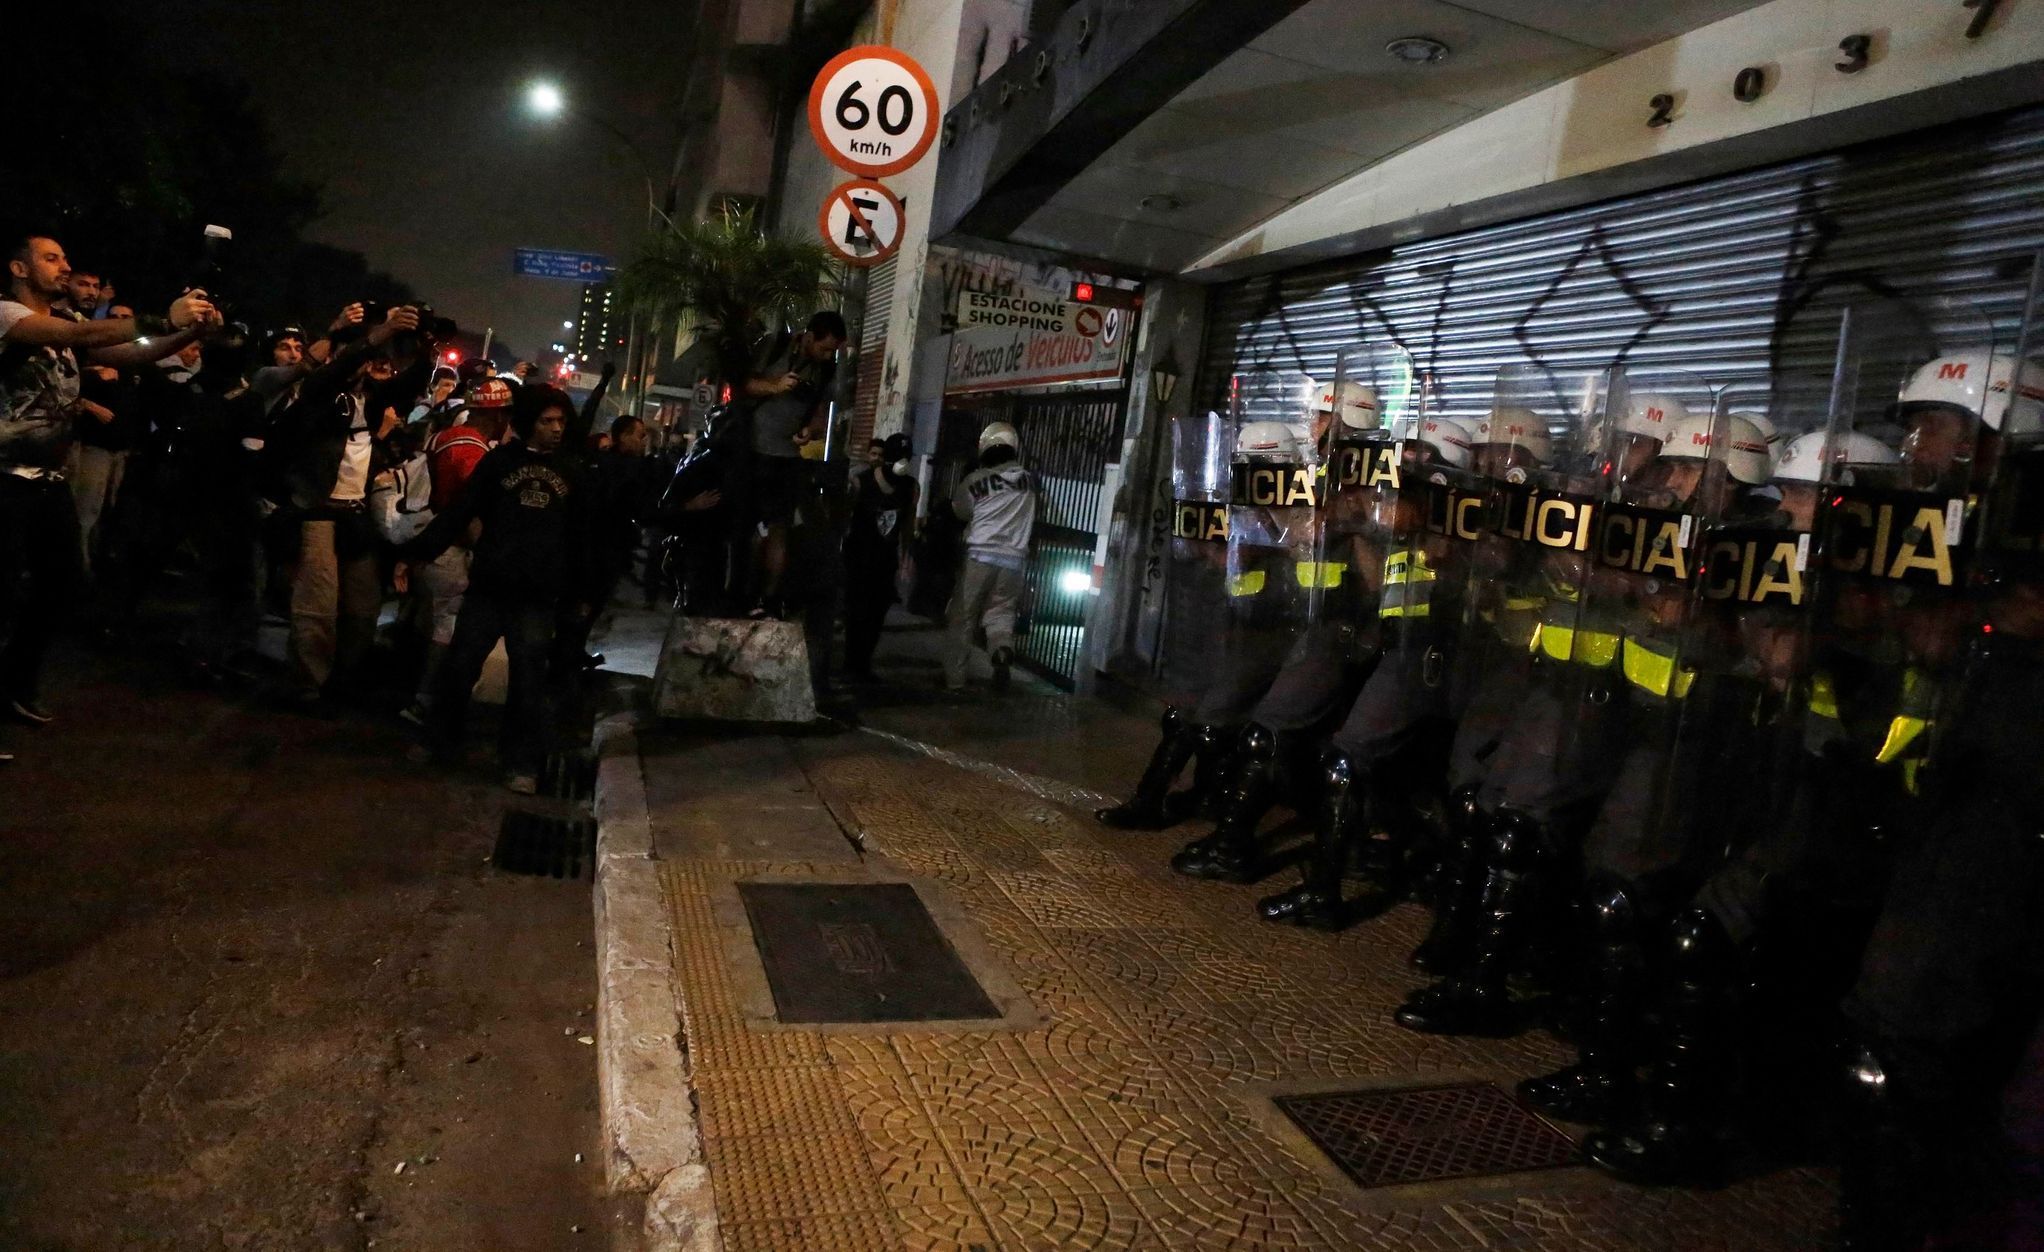 Military police clash with demonstrators during a protest against the 2014 World Cup, in Sao Paulo